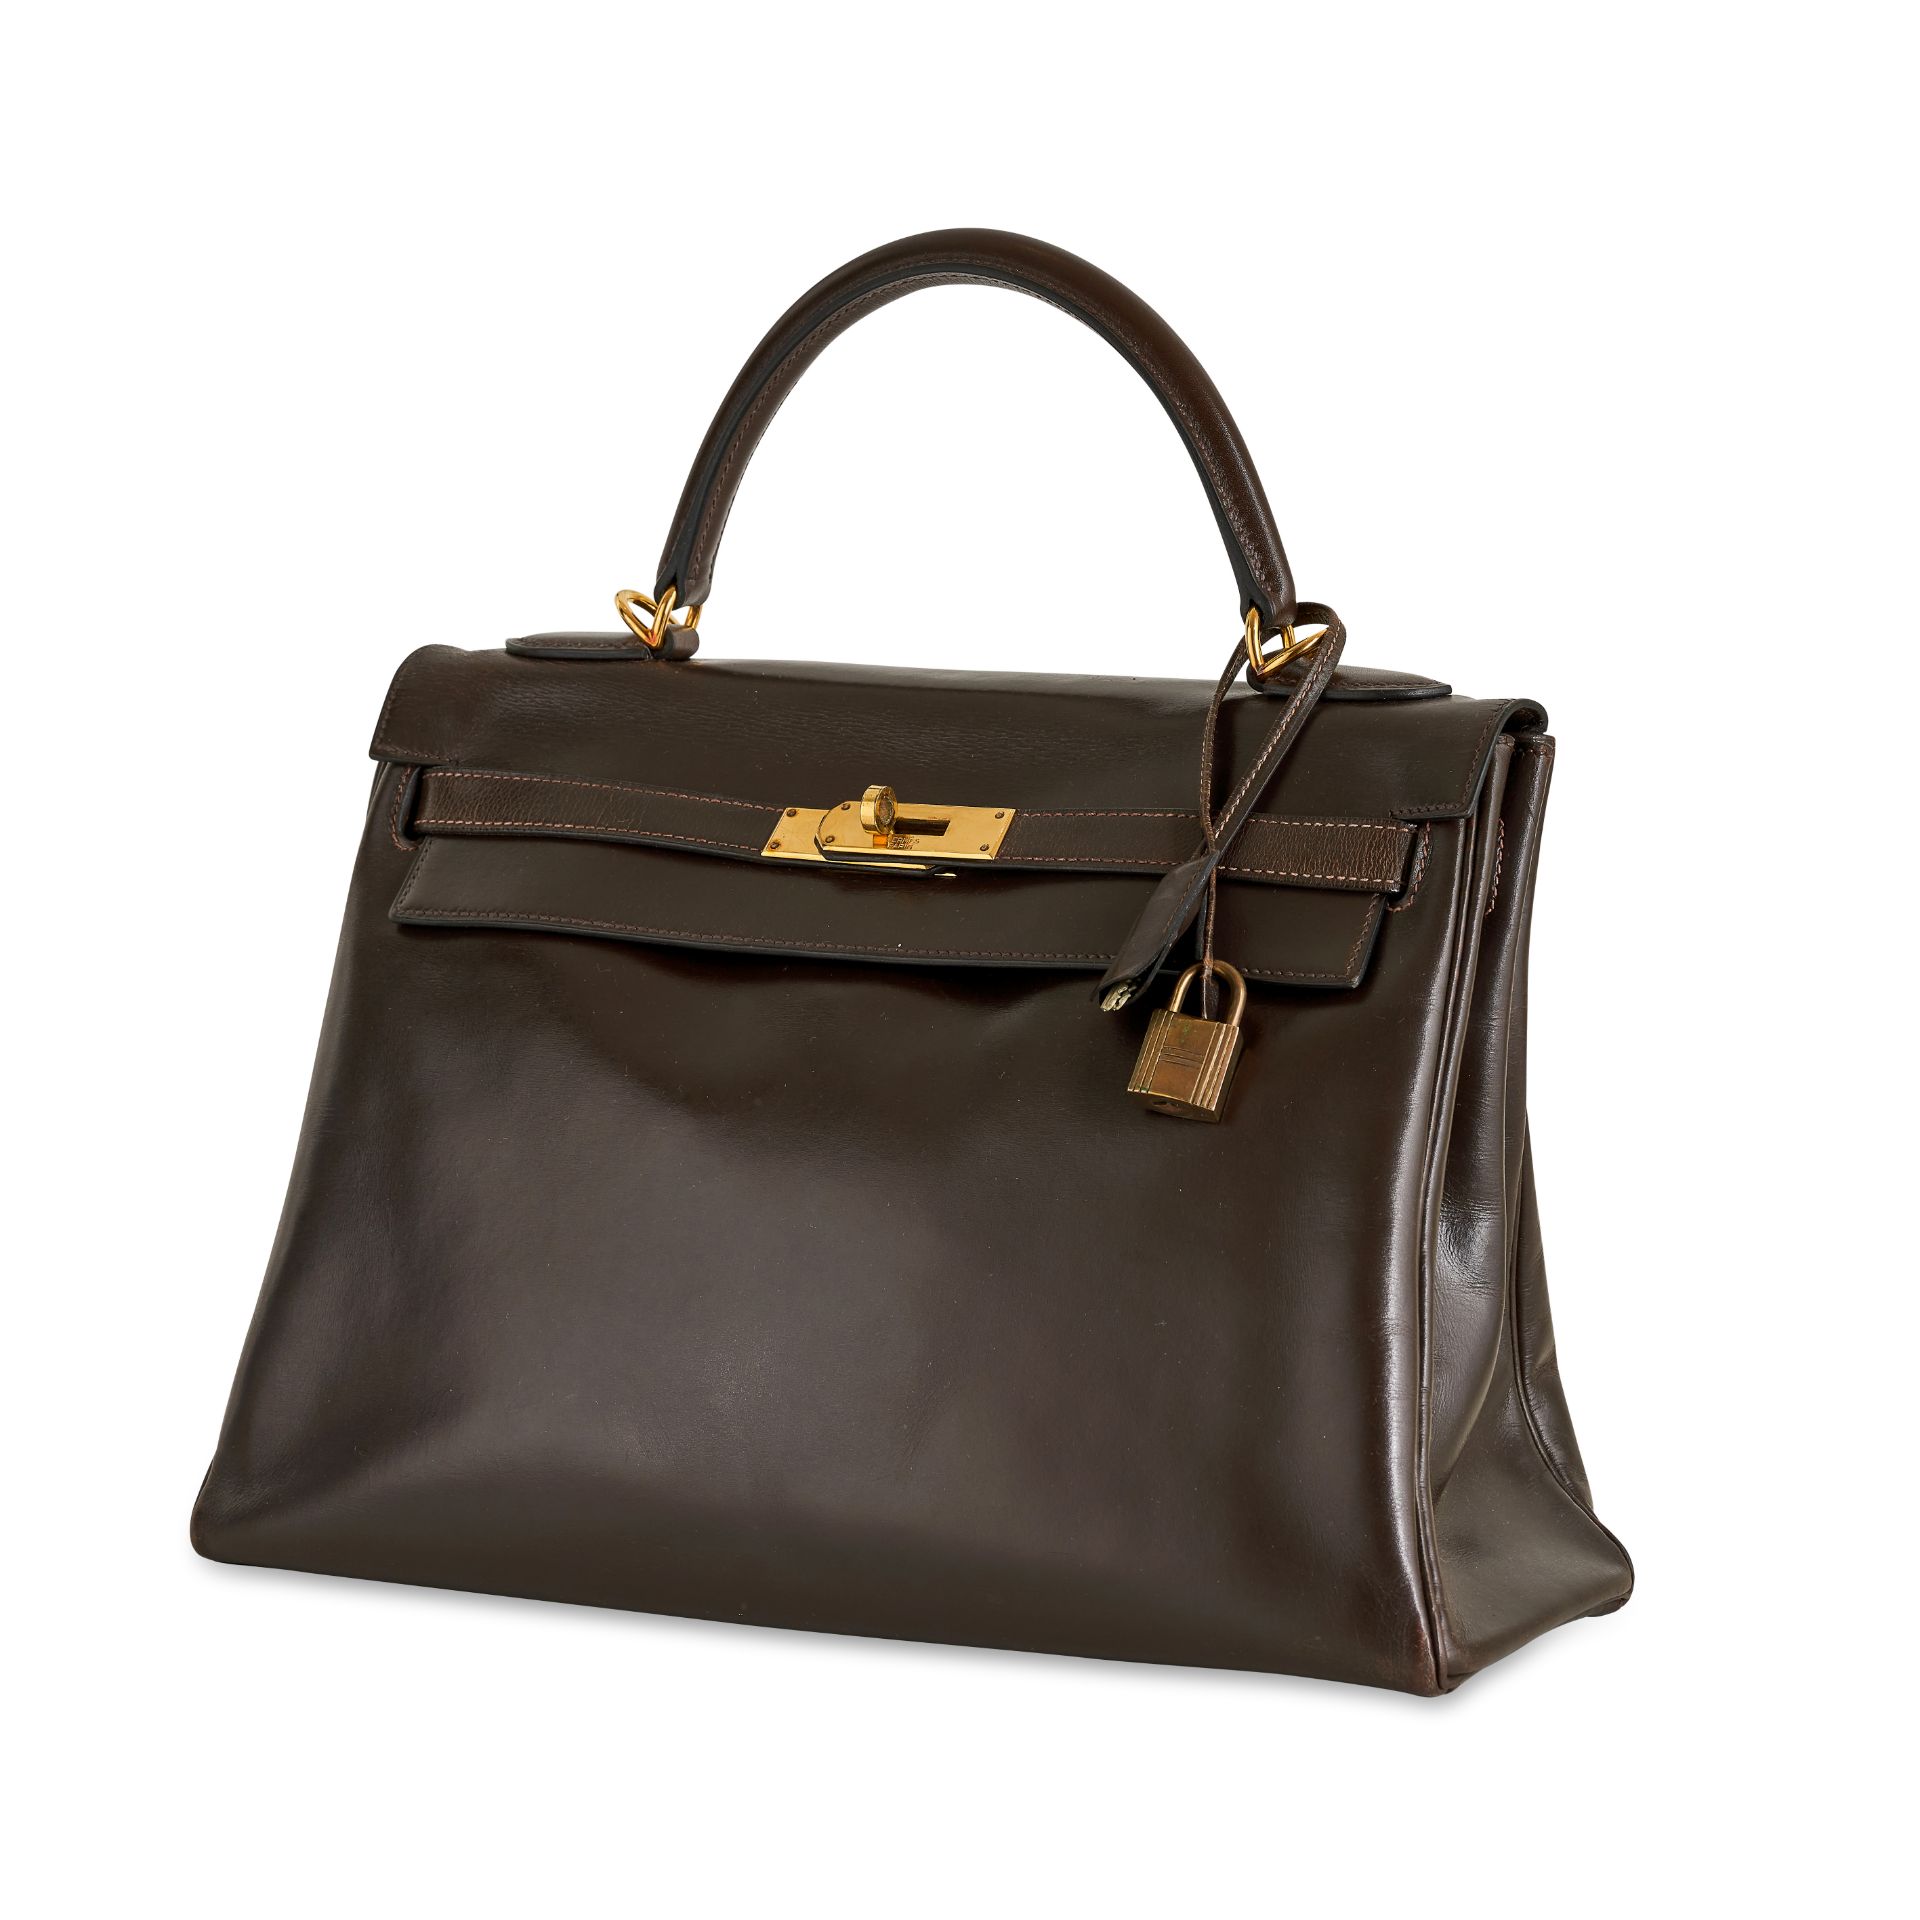 HERMES, A VINTAGE BROWN BOX KELLY 28 BAG (INCLUDES PADLOCK, KEYS AND CLOCHETTE) - Image 2 of 7